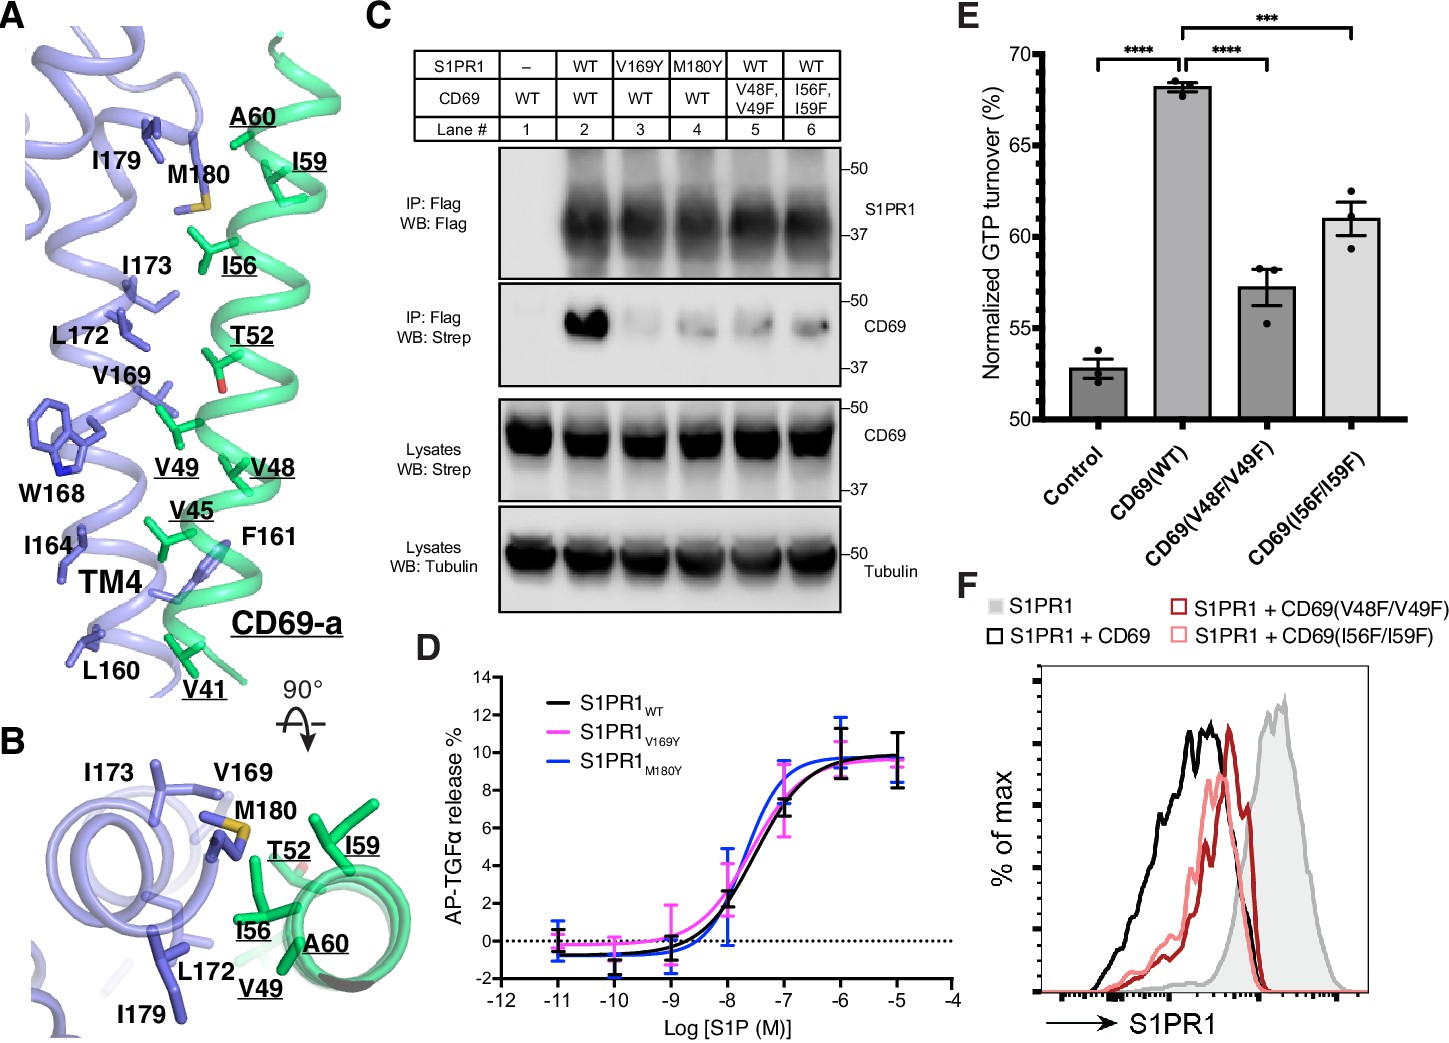 Transmembrane protein CD69 acts as an S1PR1 agonist